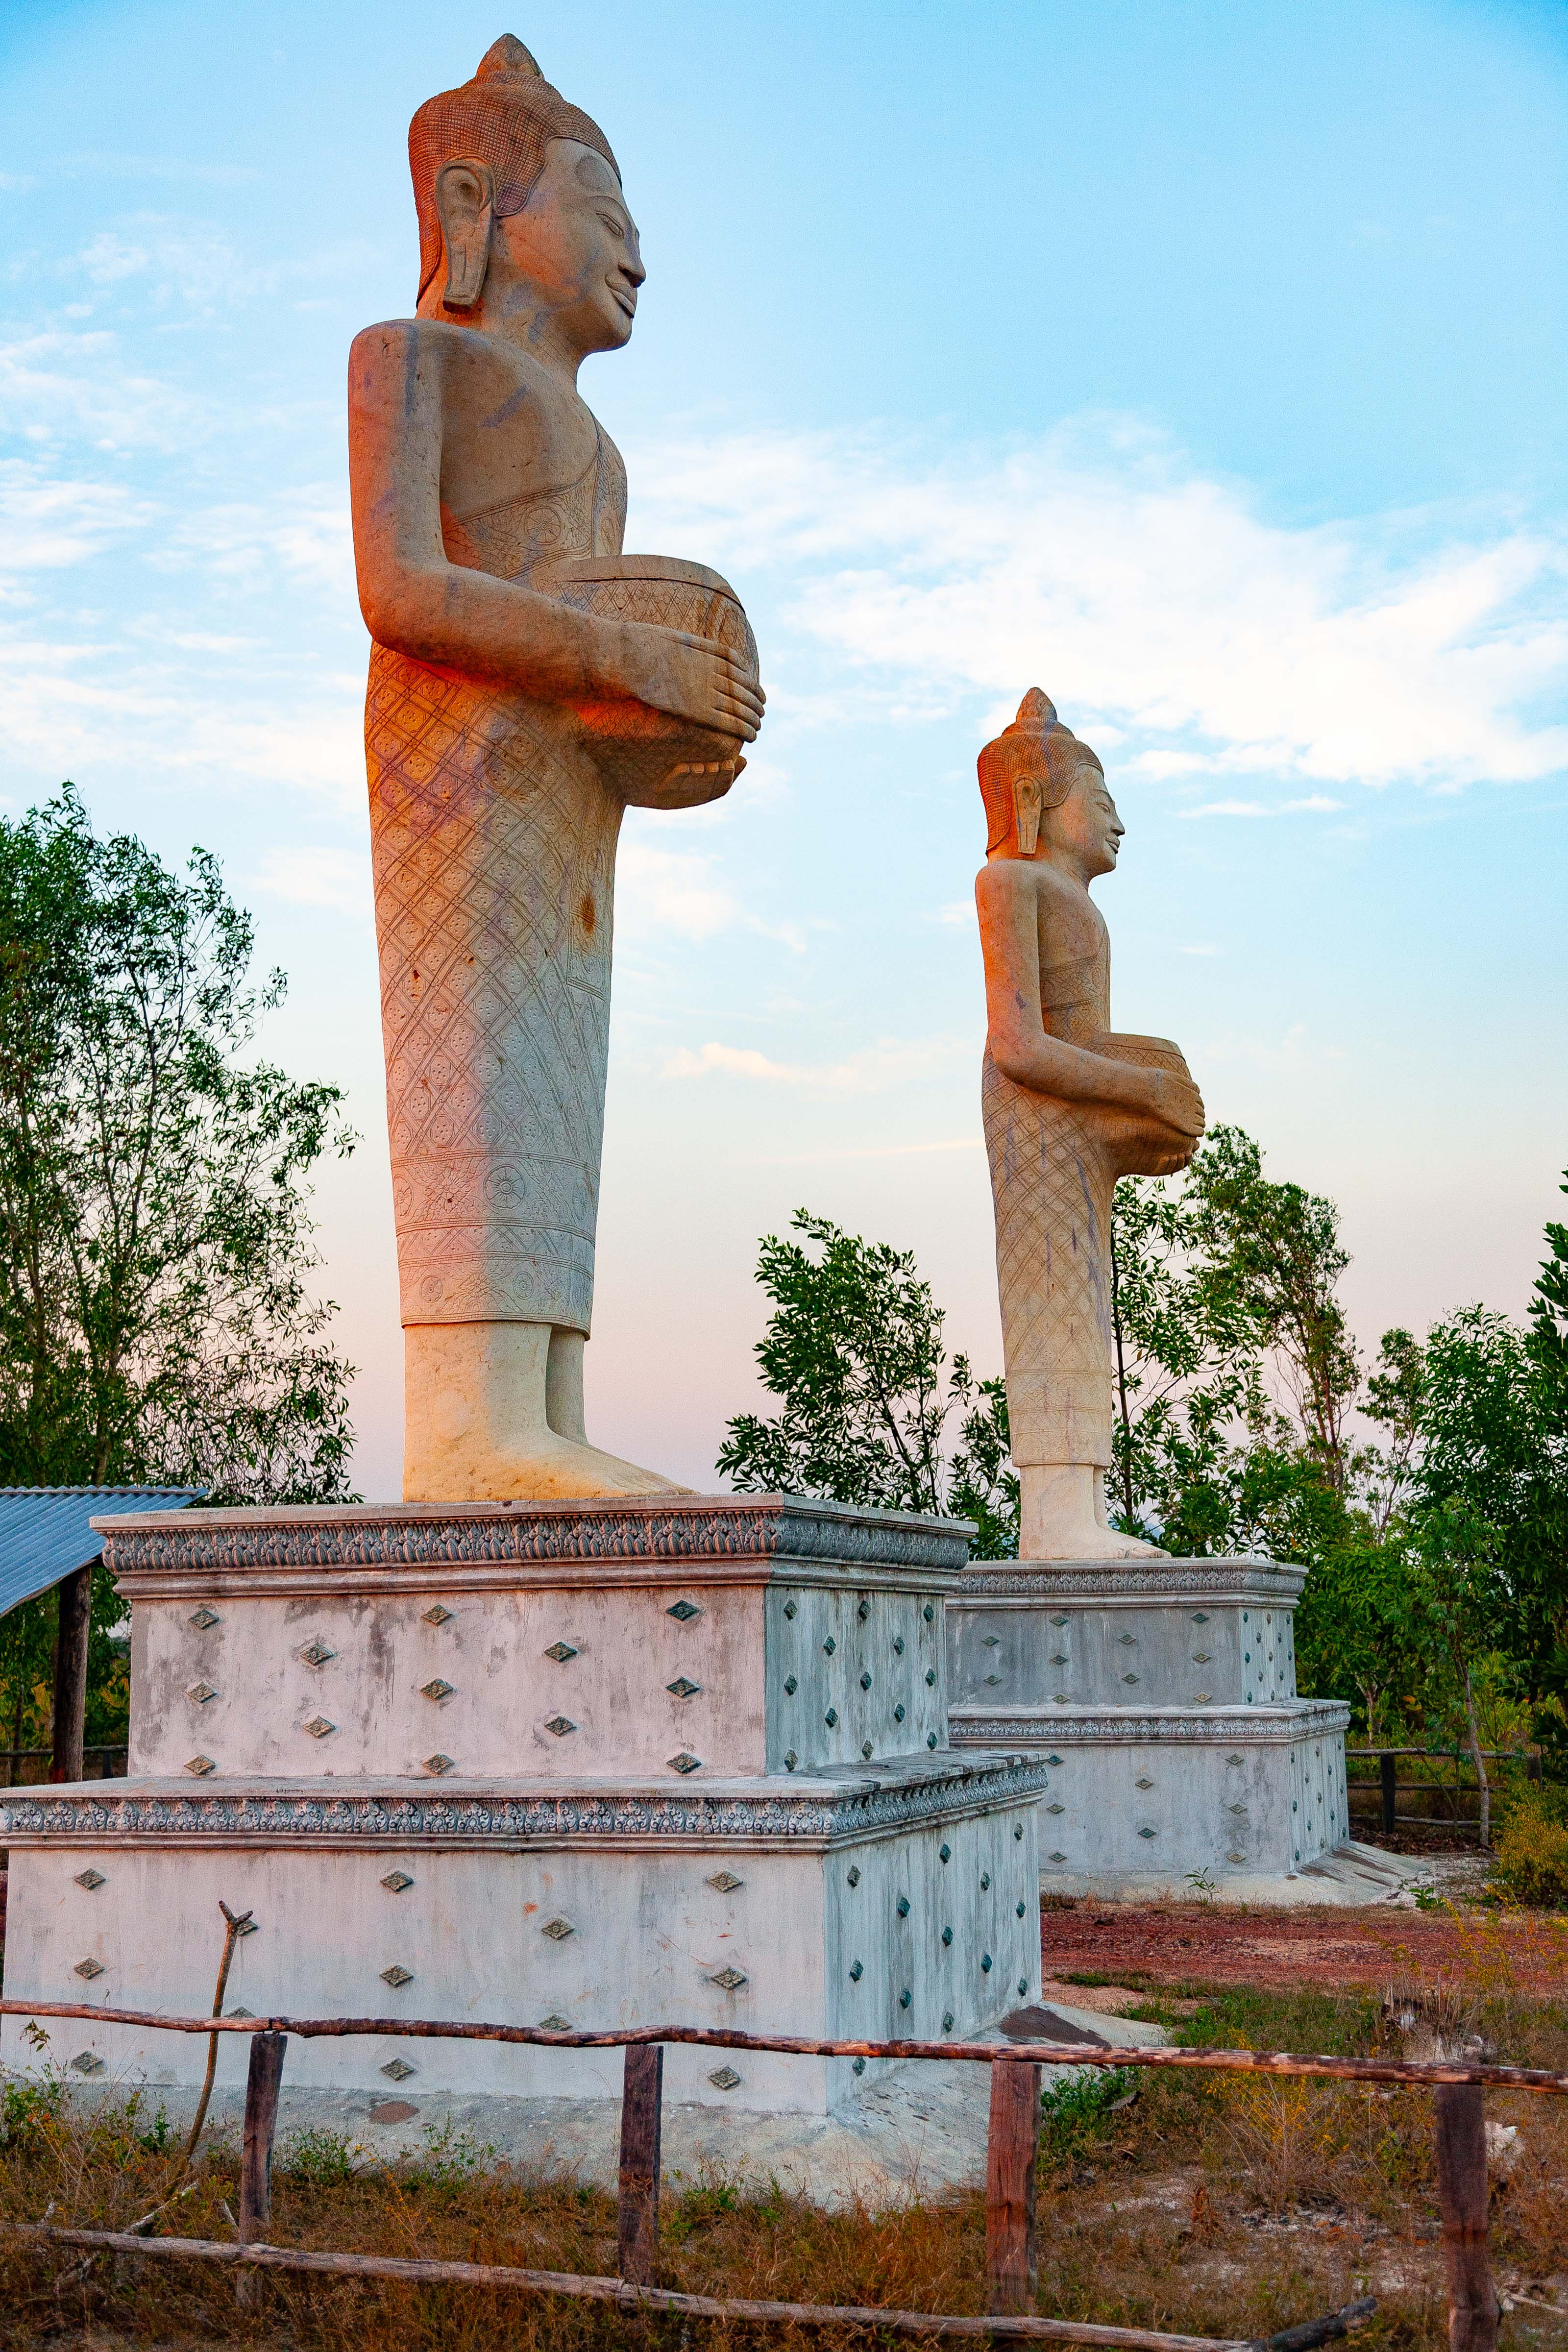 Cambodia, Kaoh Kong Prov, Country Statues, 2010, IMG 5085